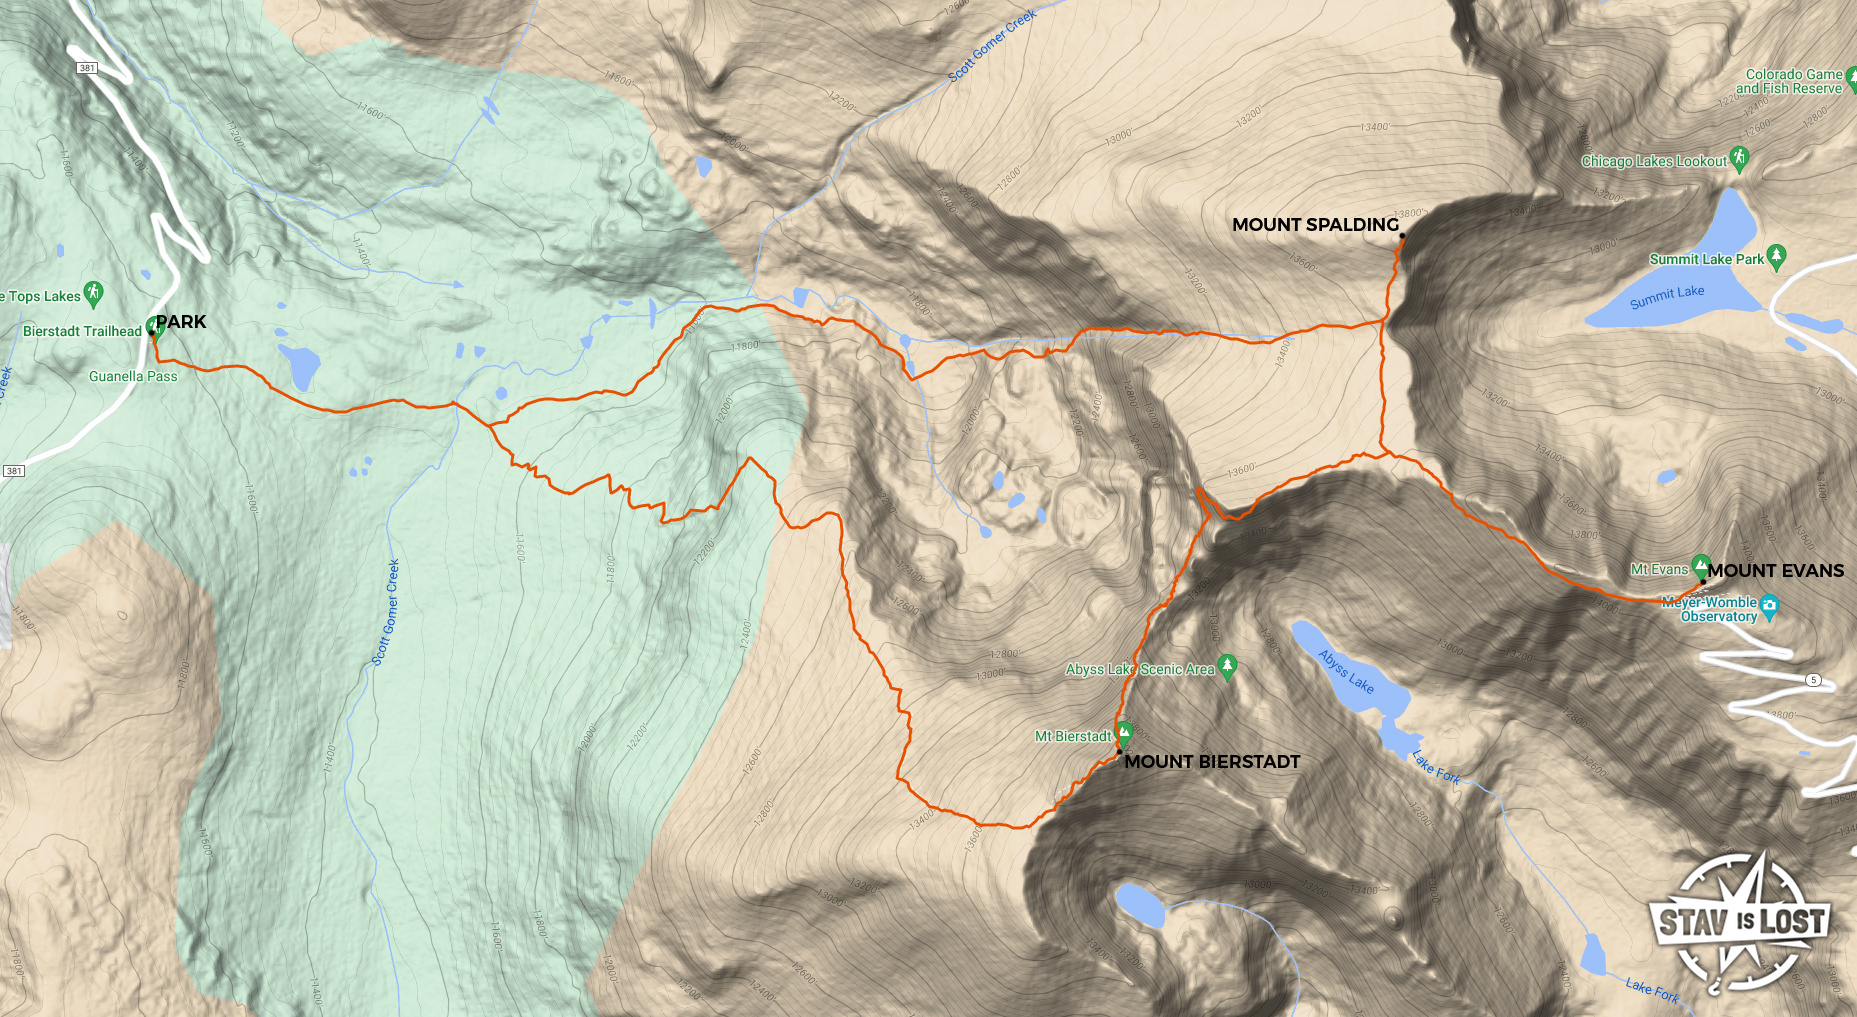 map for Mount Bierstadt, Mount Blue Sky, Mount Spalding via The Sawtooth by stav is lost